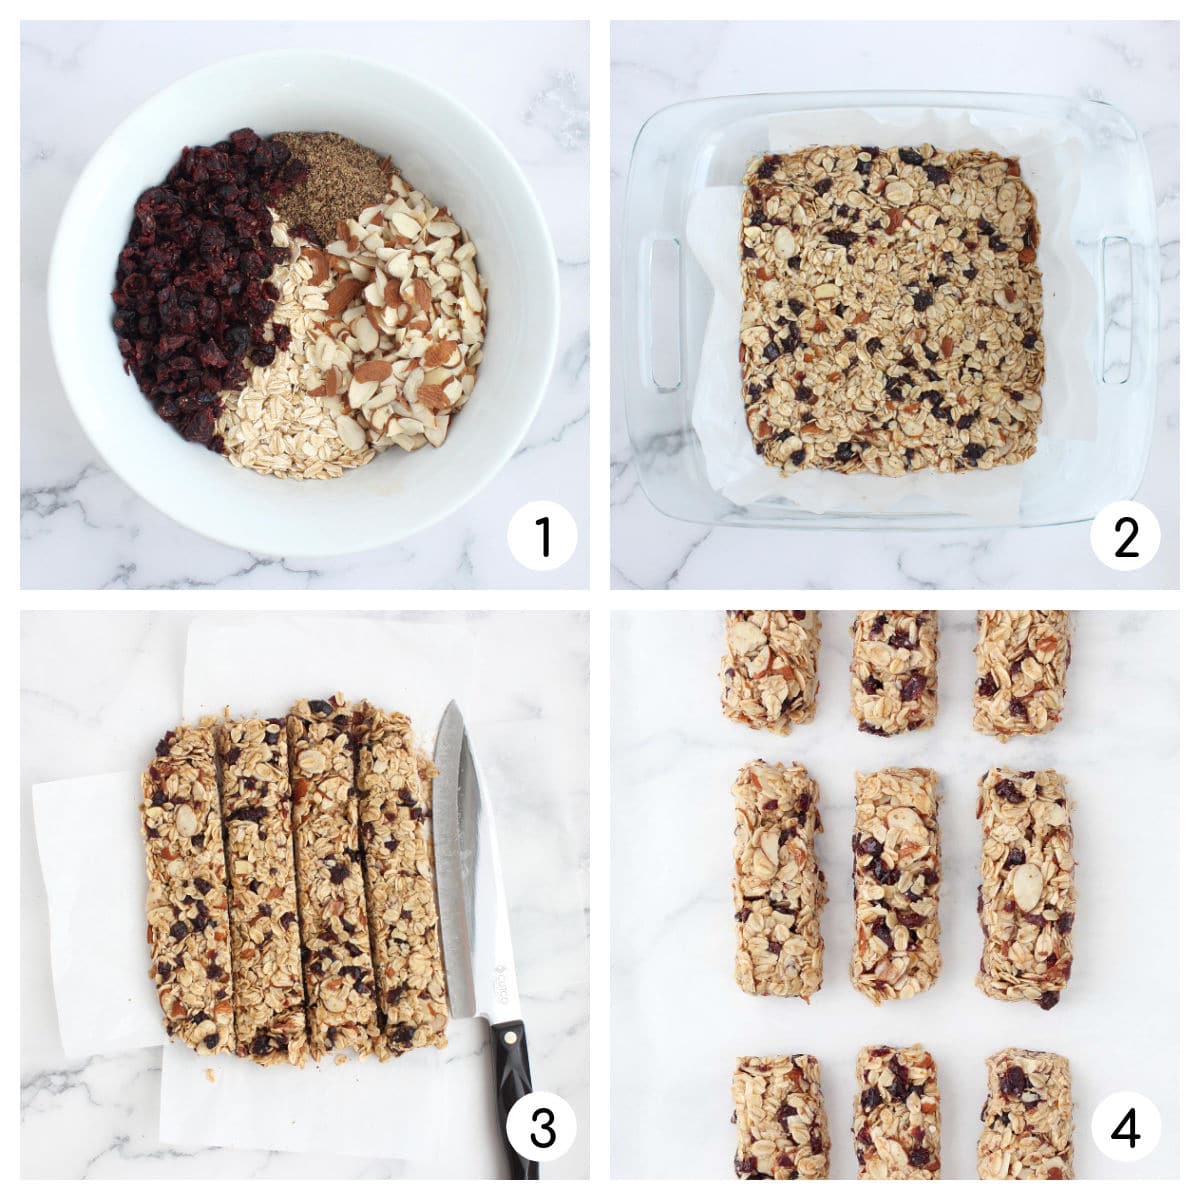 process shots that show how to make oatmeal bars